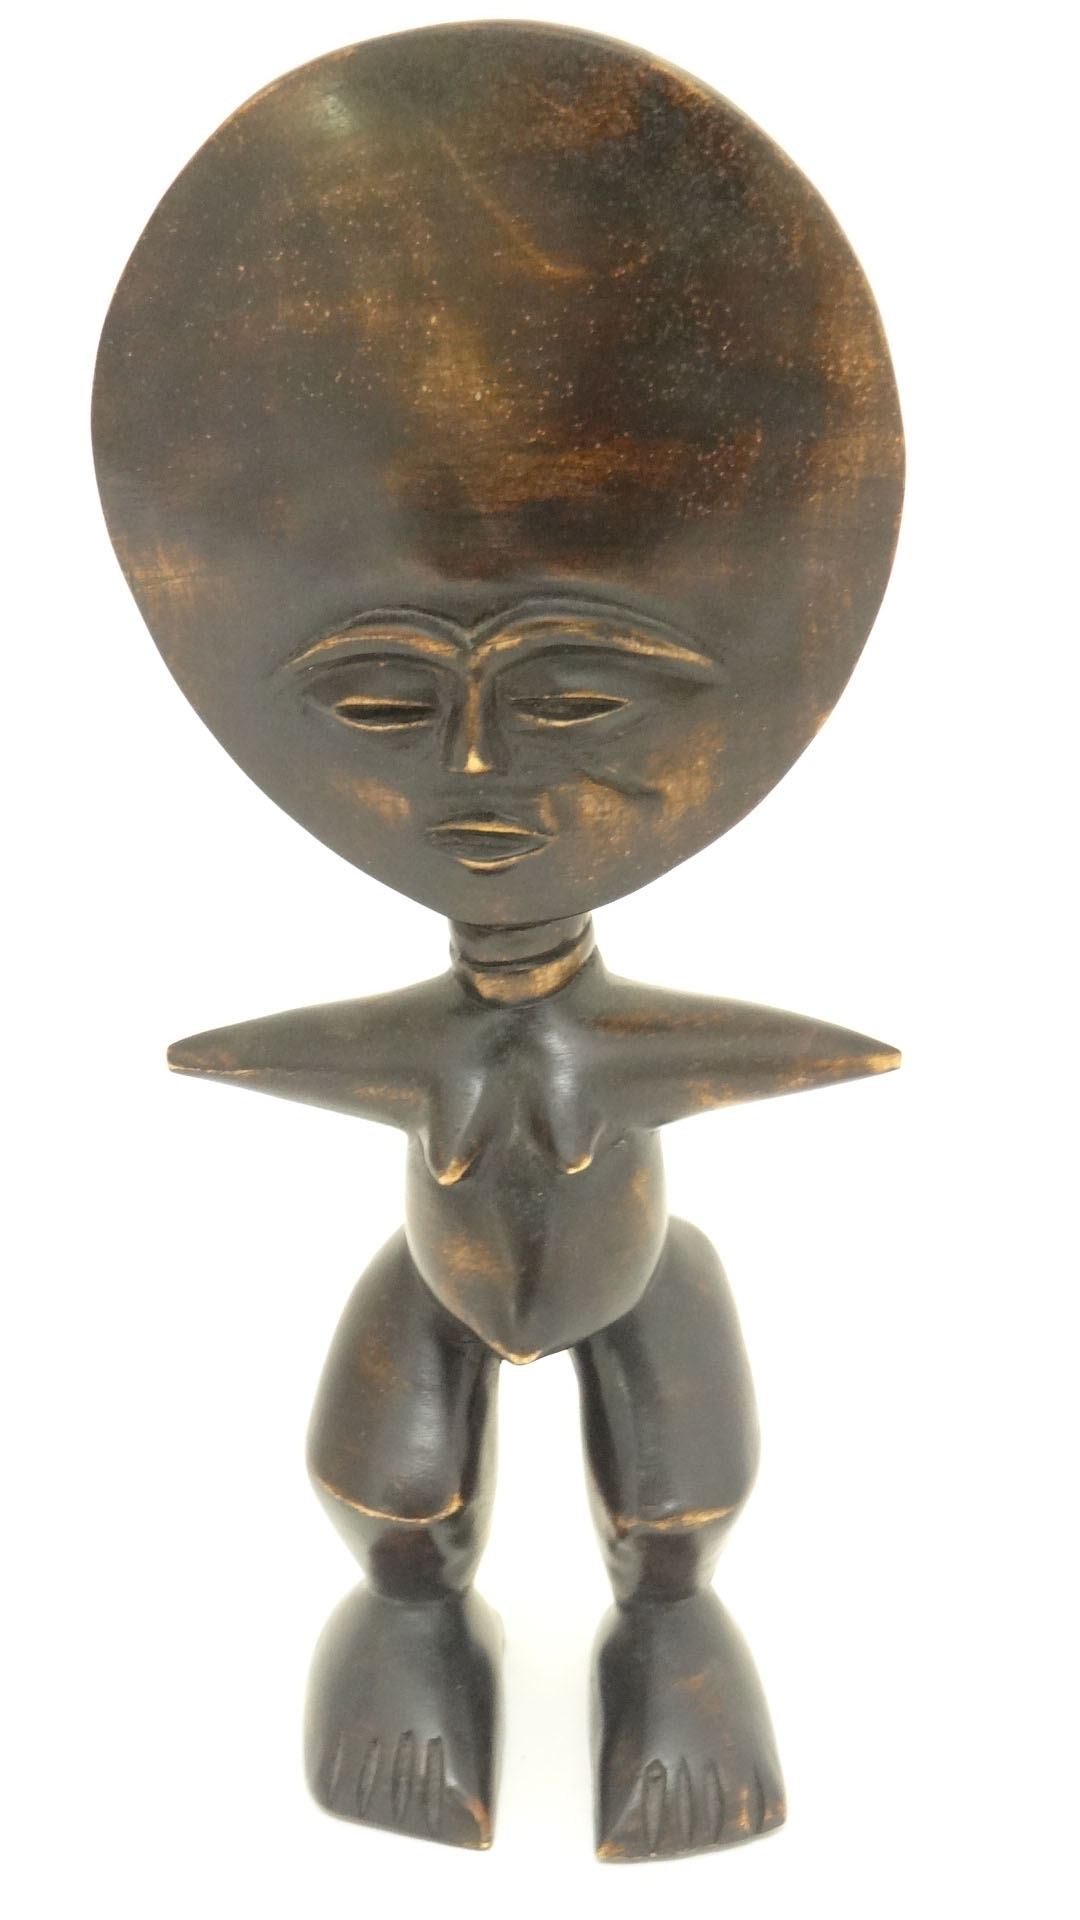 Native Tribal Wooden Figure Sold For £650